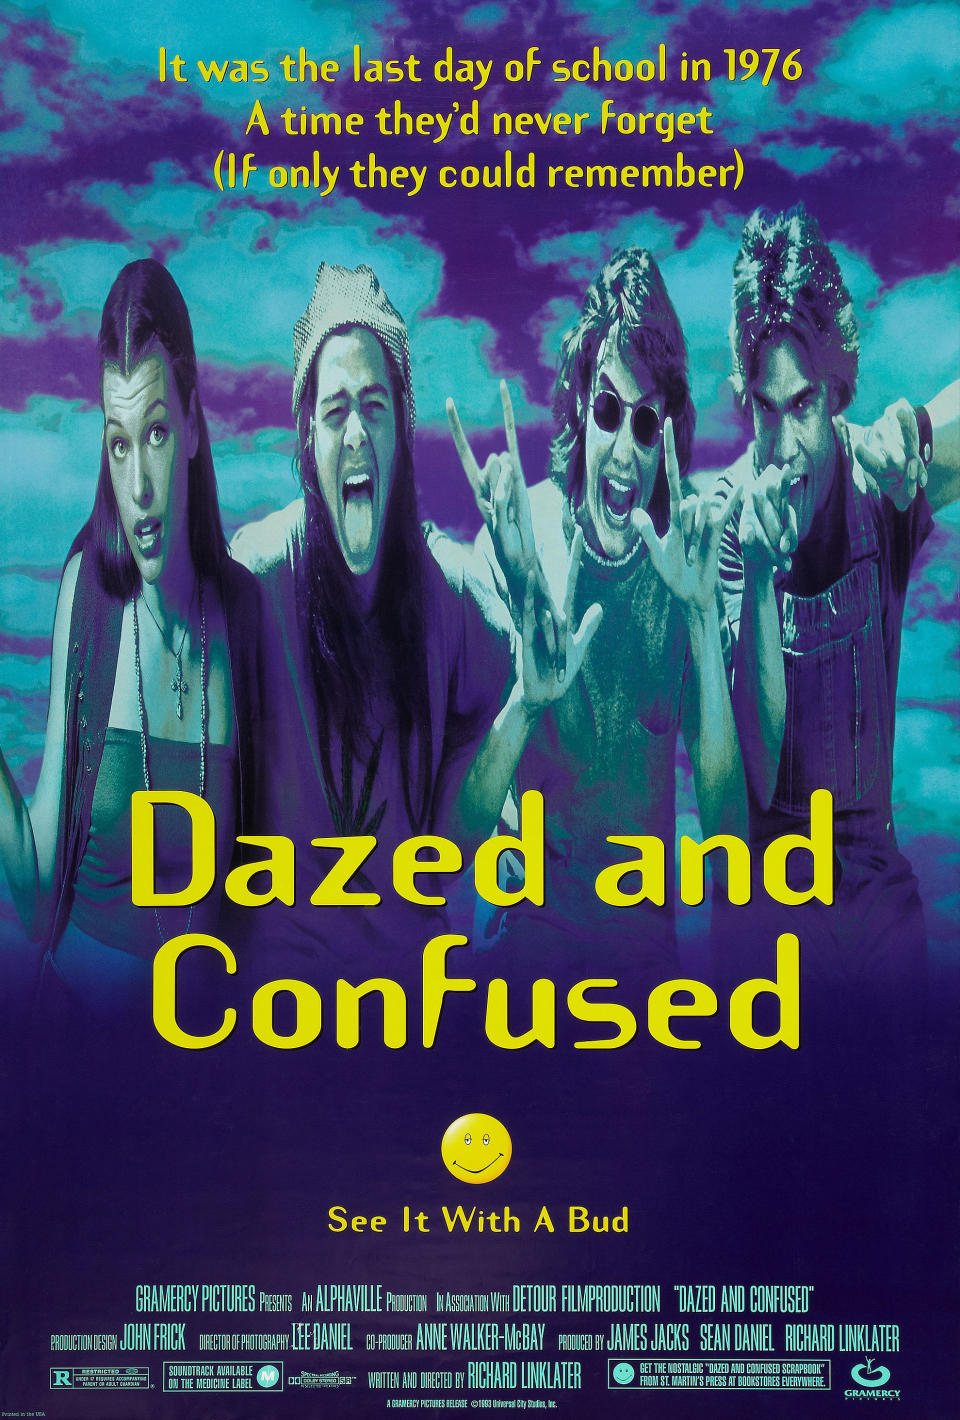 Movie poster for "Dazed and Confused" with four characters imitating a scream